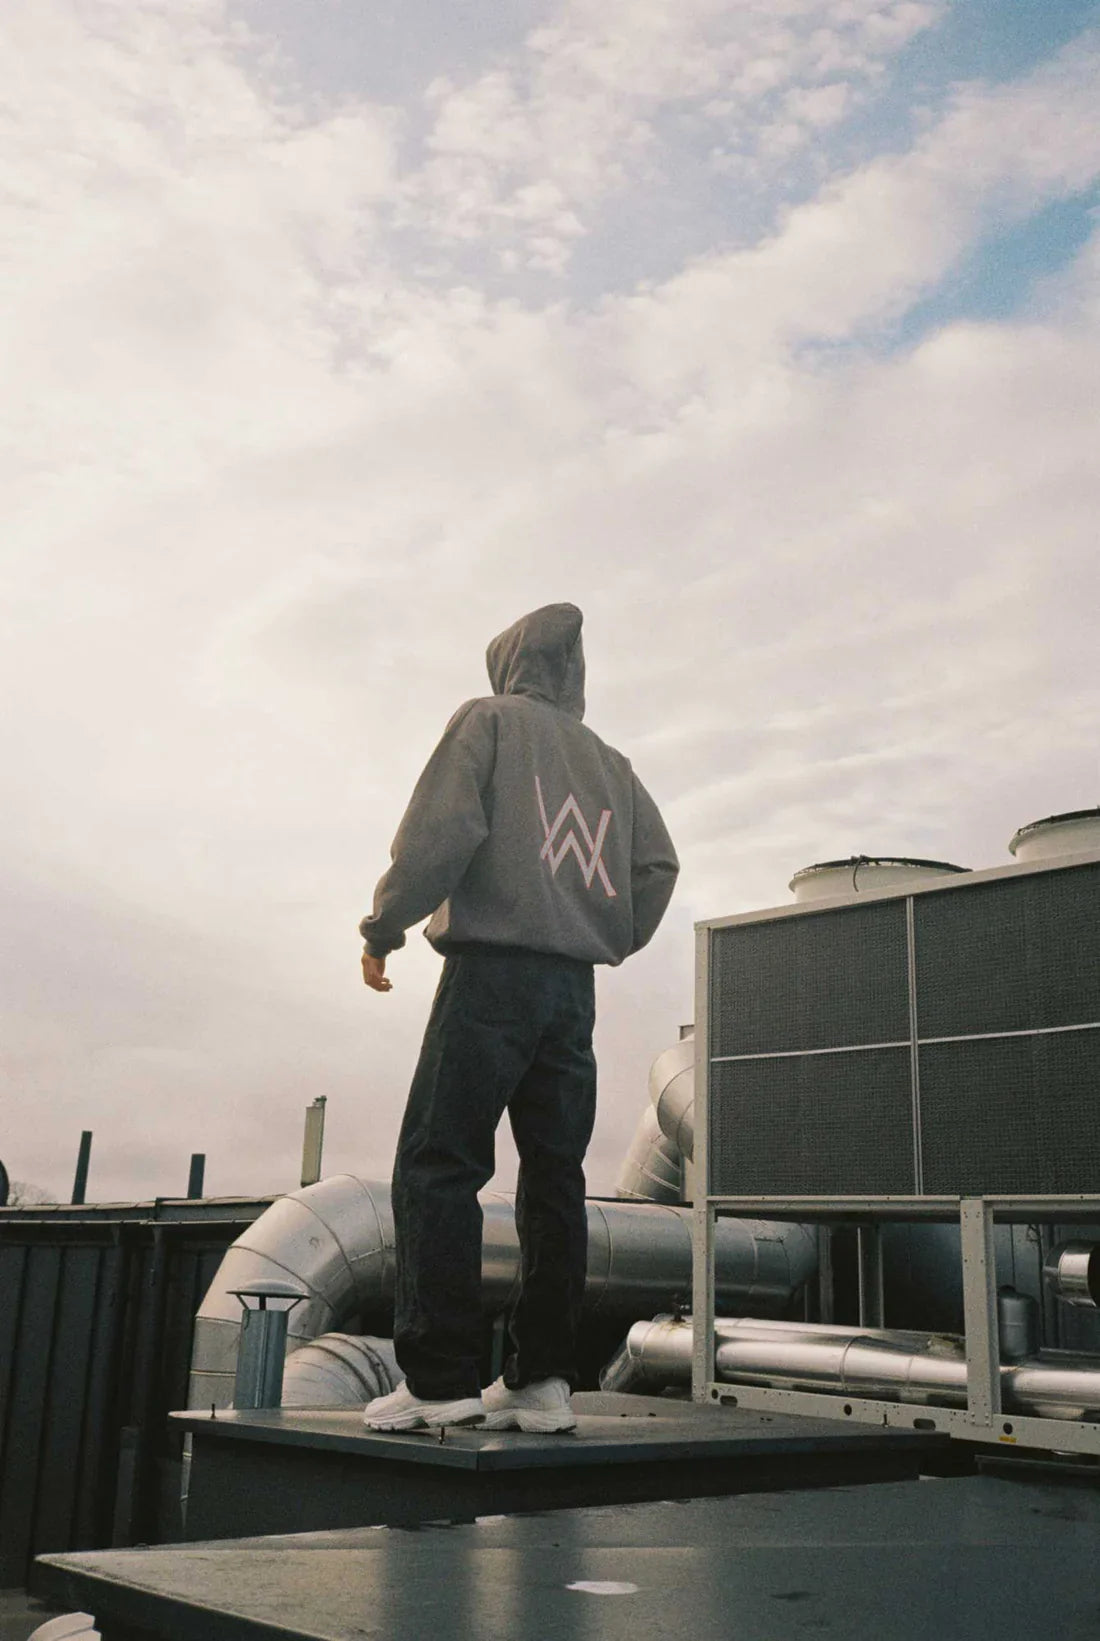 Person standing on a rooftop with their back turned, wearing Alan Walker's Gaming Hoodie featuring the iconic white Alan Walker logo against a cloudy sky backdrop.